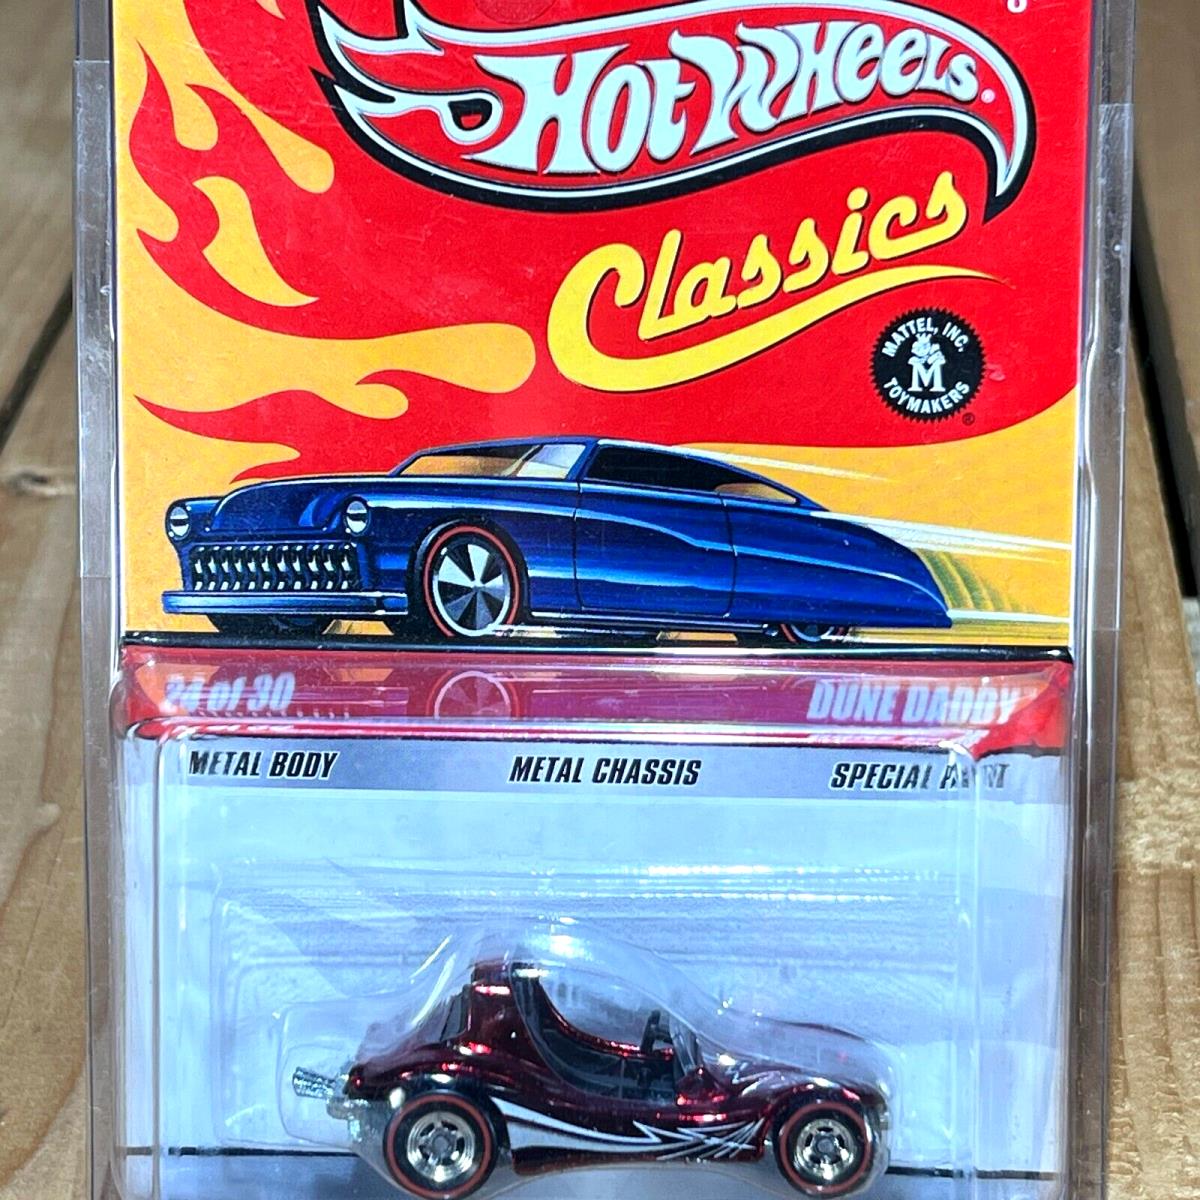 Hot Wheels Classics Series 5 Chase Dune Daddy Spectraflame Red Real Riders 1:64